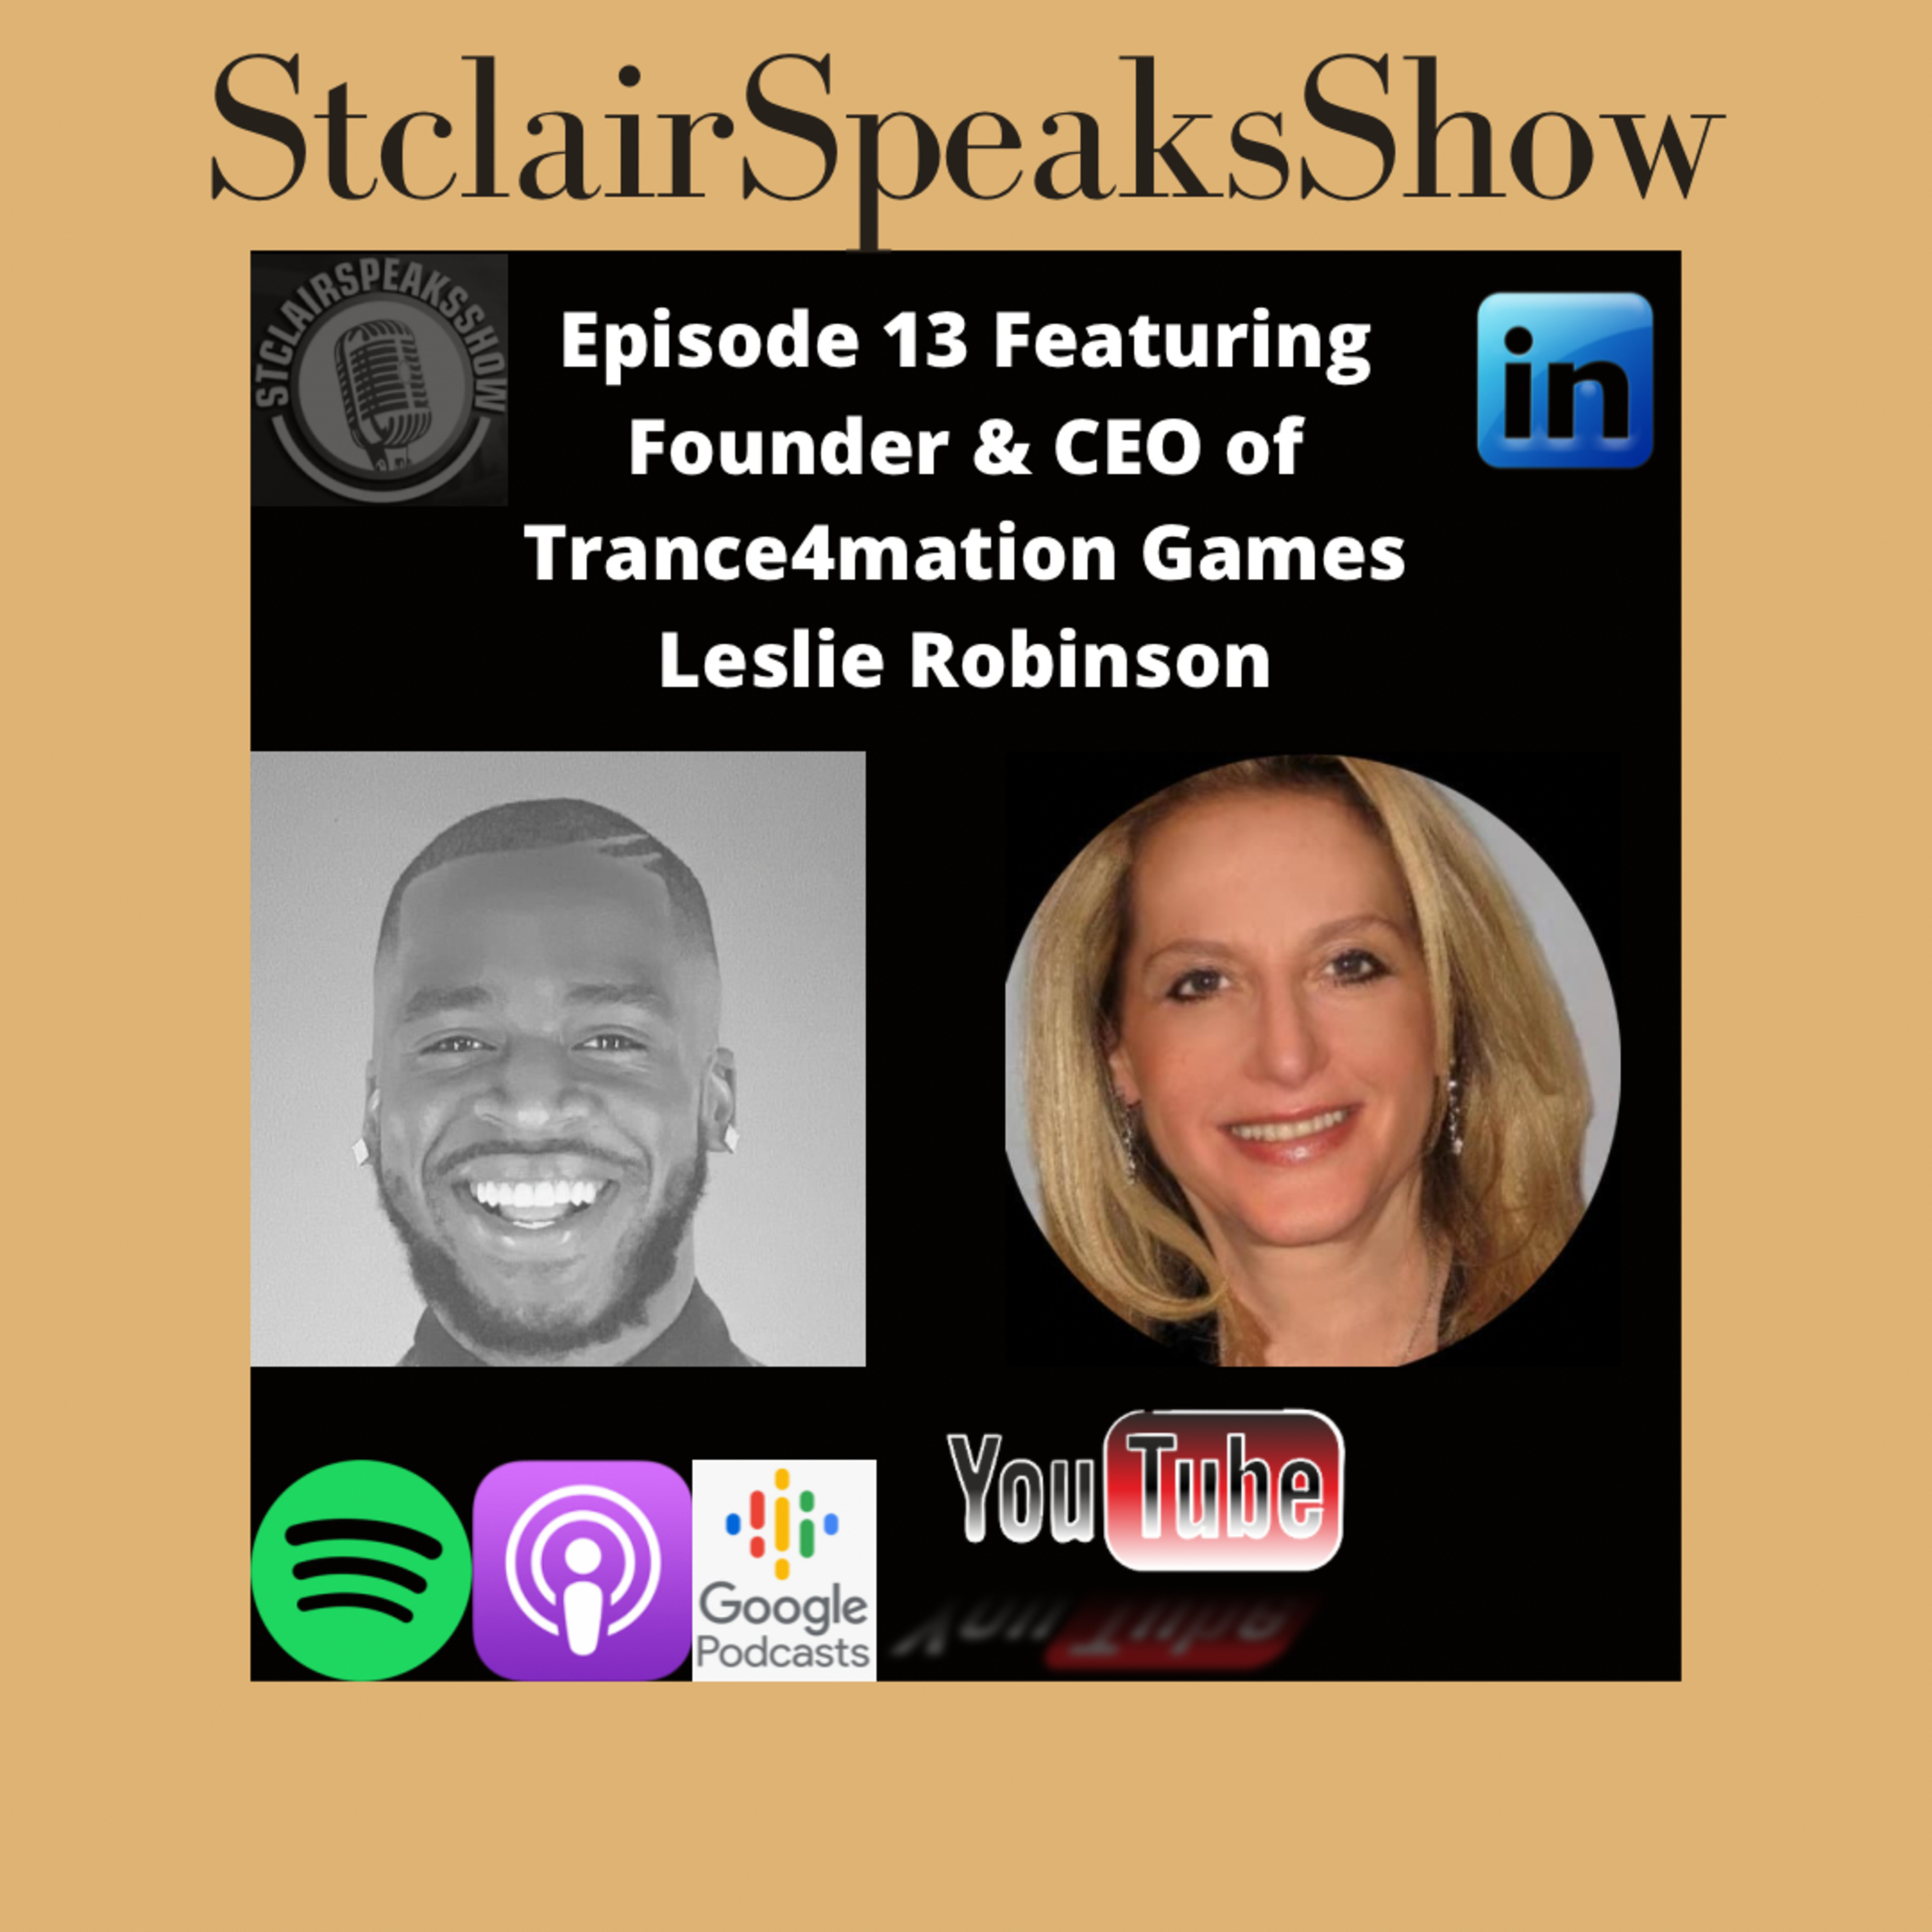 The StclairSpeaksShow Podcast Featuring Leslie Robinson Founder & CEO at Trance4mation Games